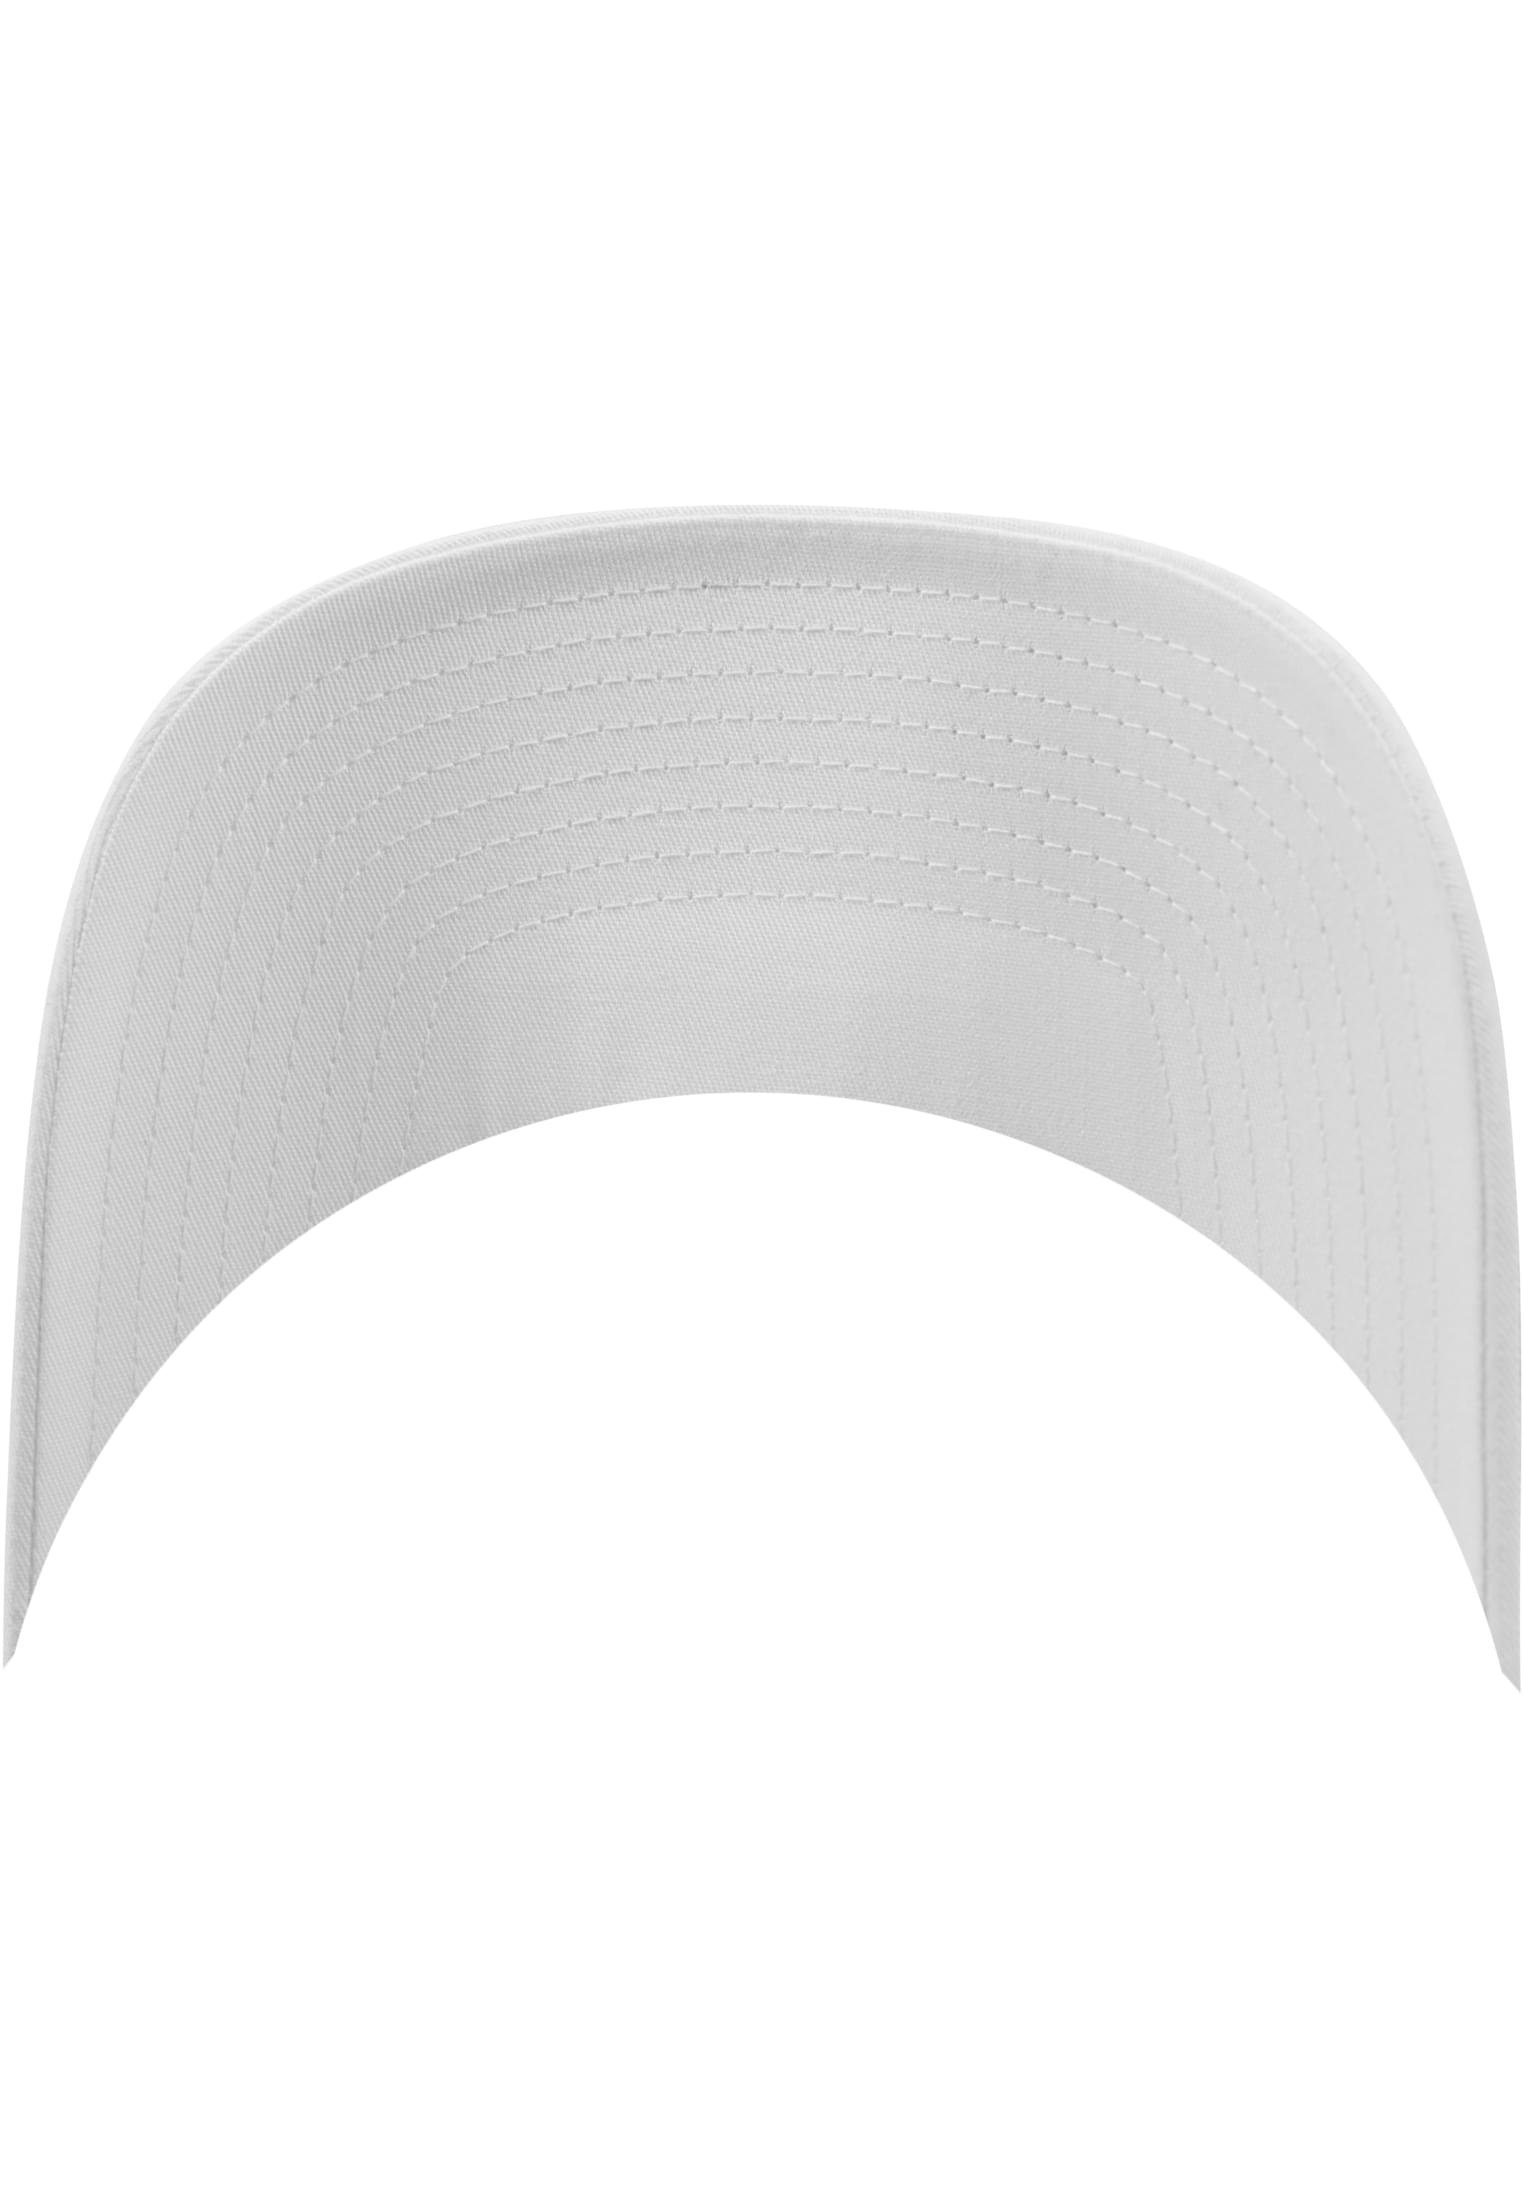 Snapback Curved Classic Snapback in Farbe white